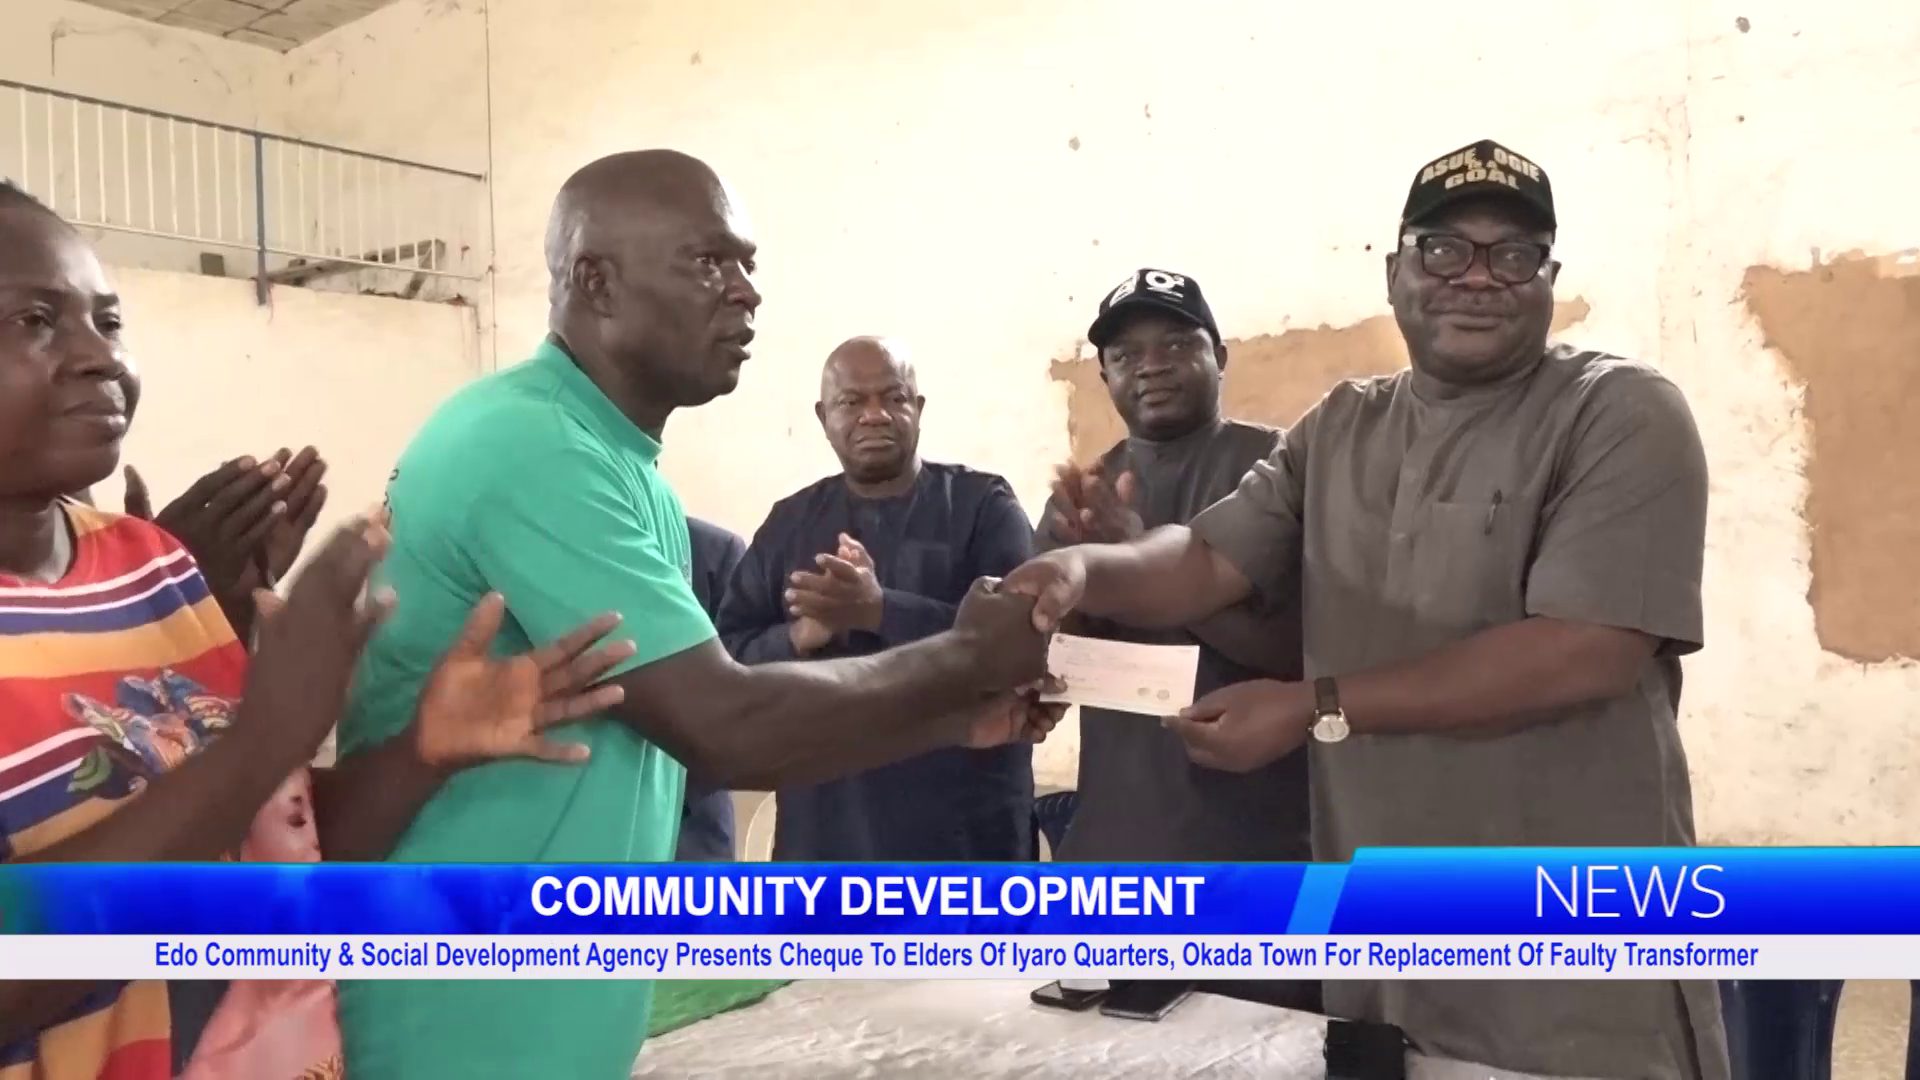 Edo Community & Social Development Agency Presents Cheque To Elders Of Iyaro Quarters, Okada Town For Replacement Of Faulty Transformer